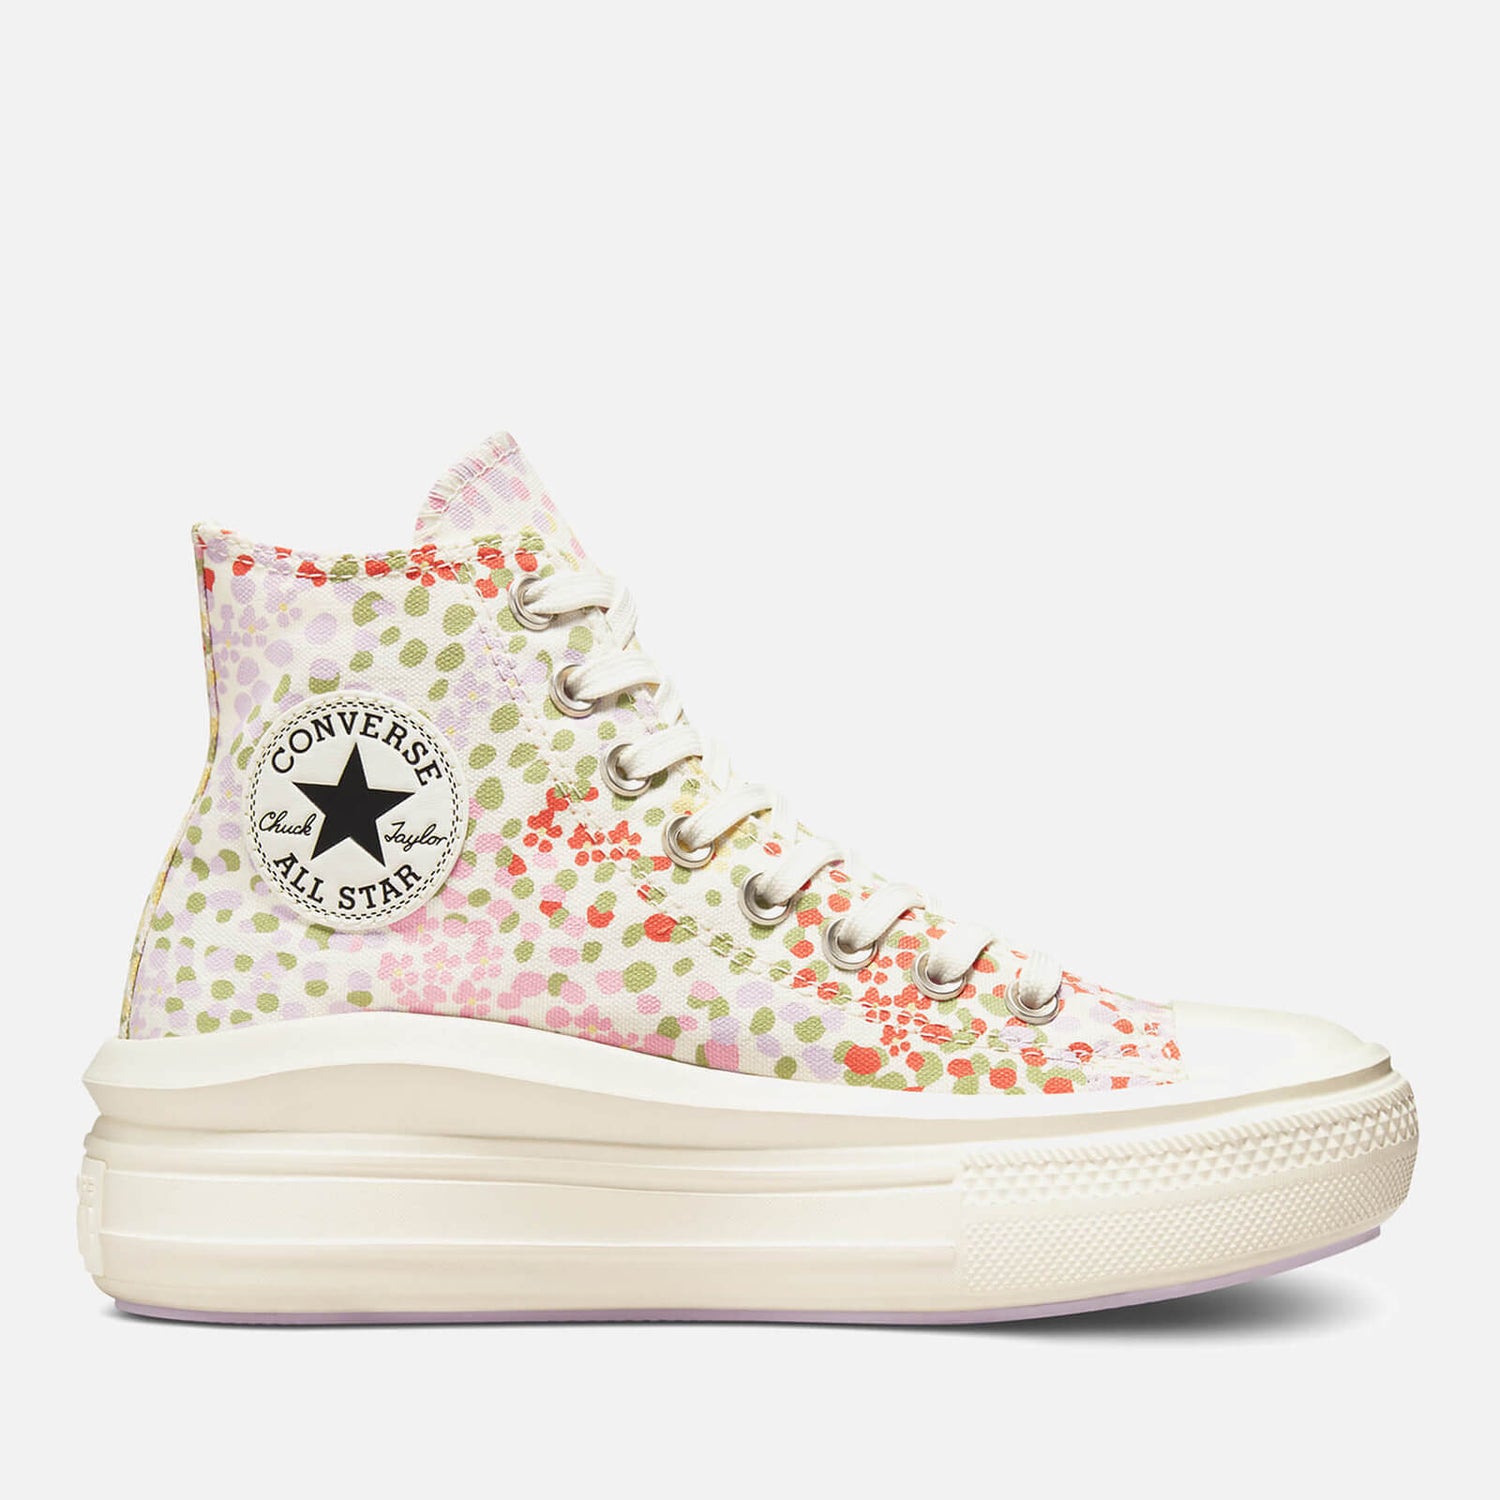 Converse Women's Chuck Taylor All Star Things To Grow Move Hi-Top Trainers - Egret/Multi/Black